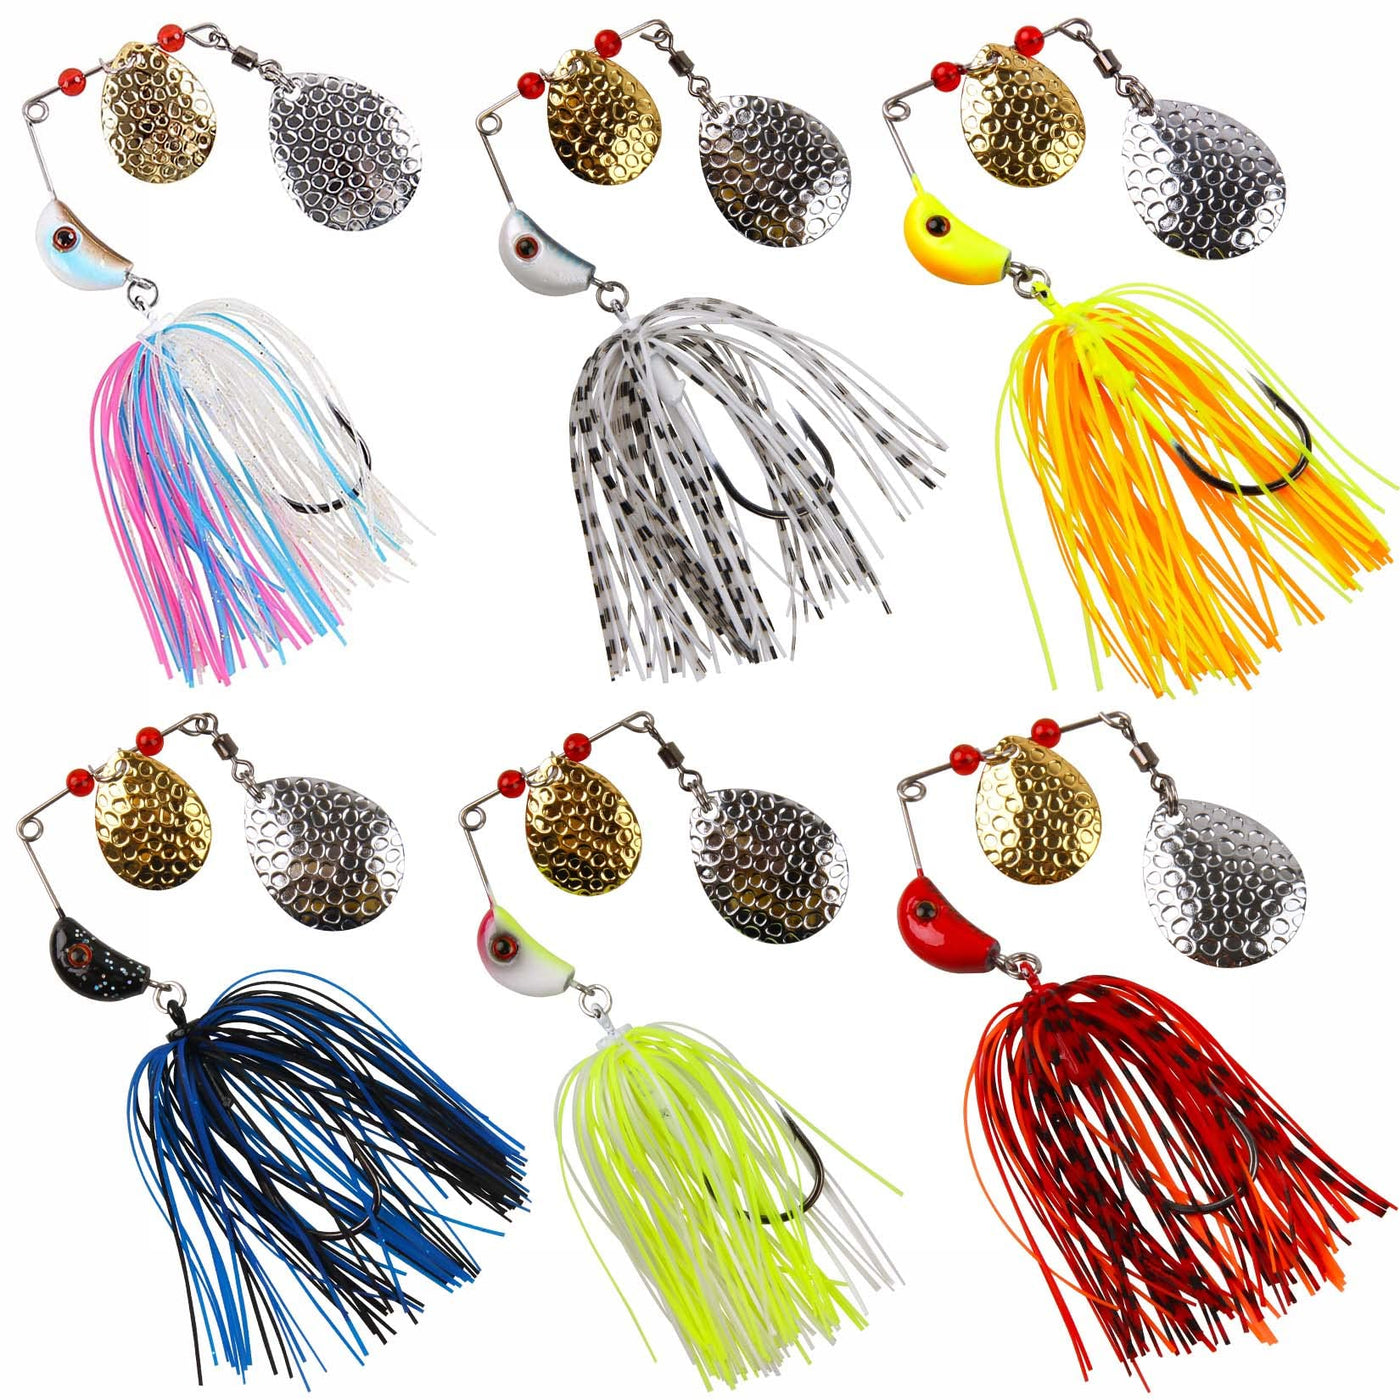 New 6pcs Bladed Jig Fishing Lures Multi-color Bass Fishing Lure Kit